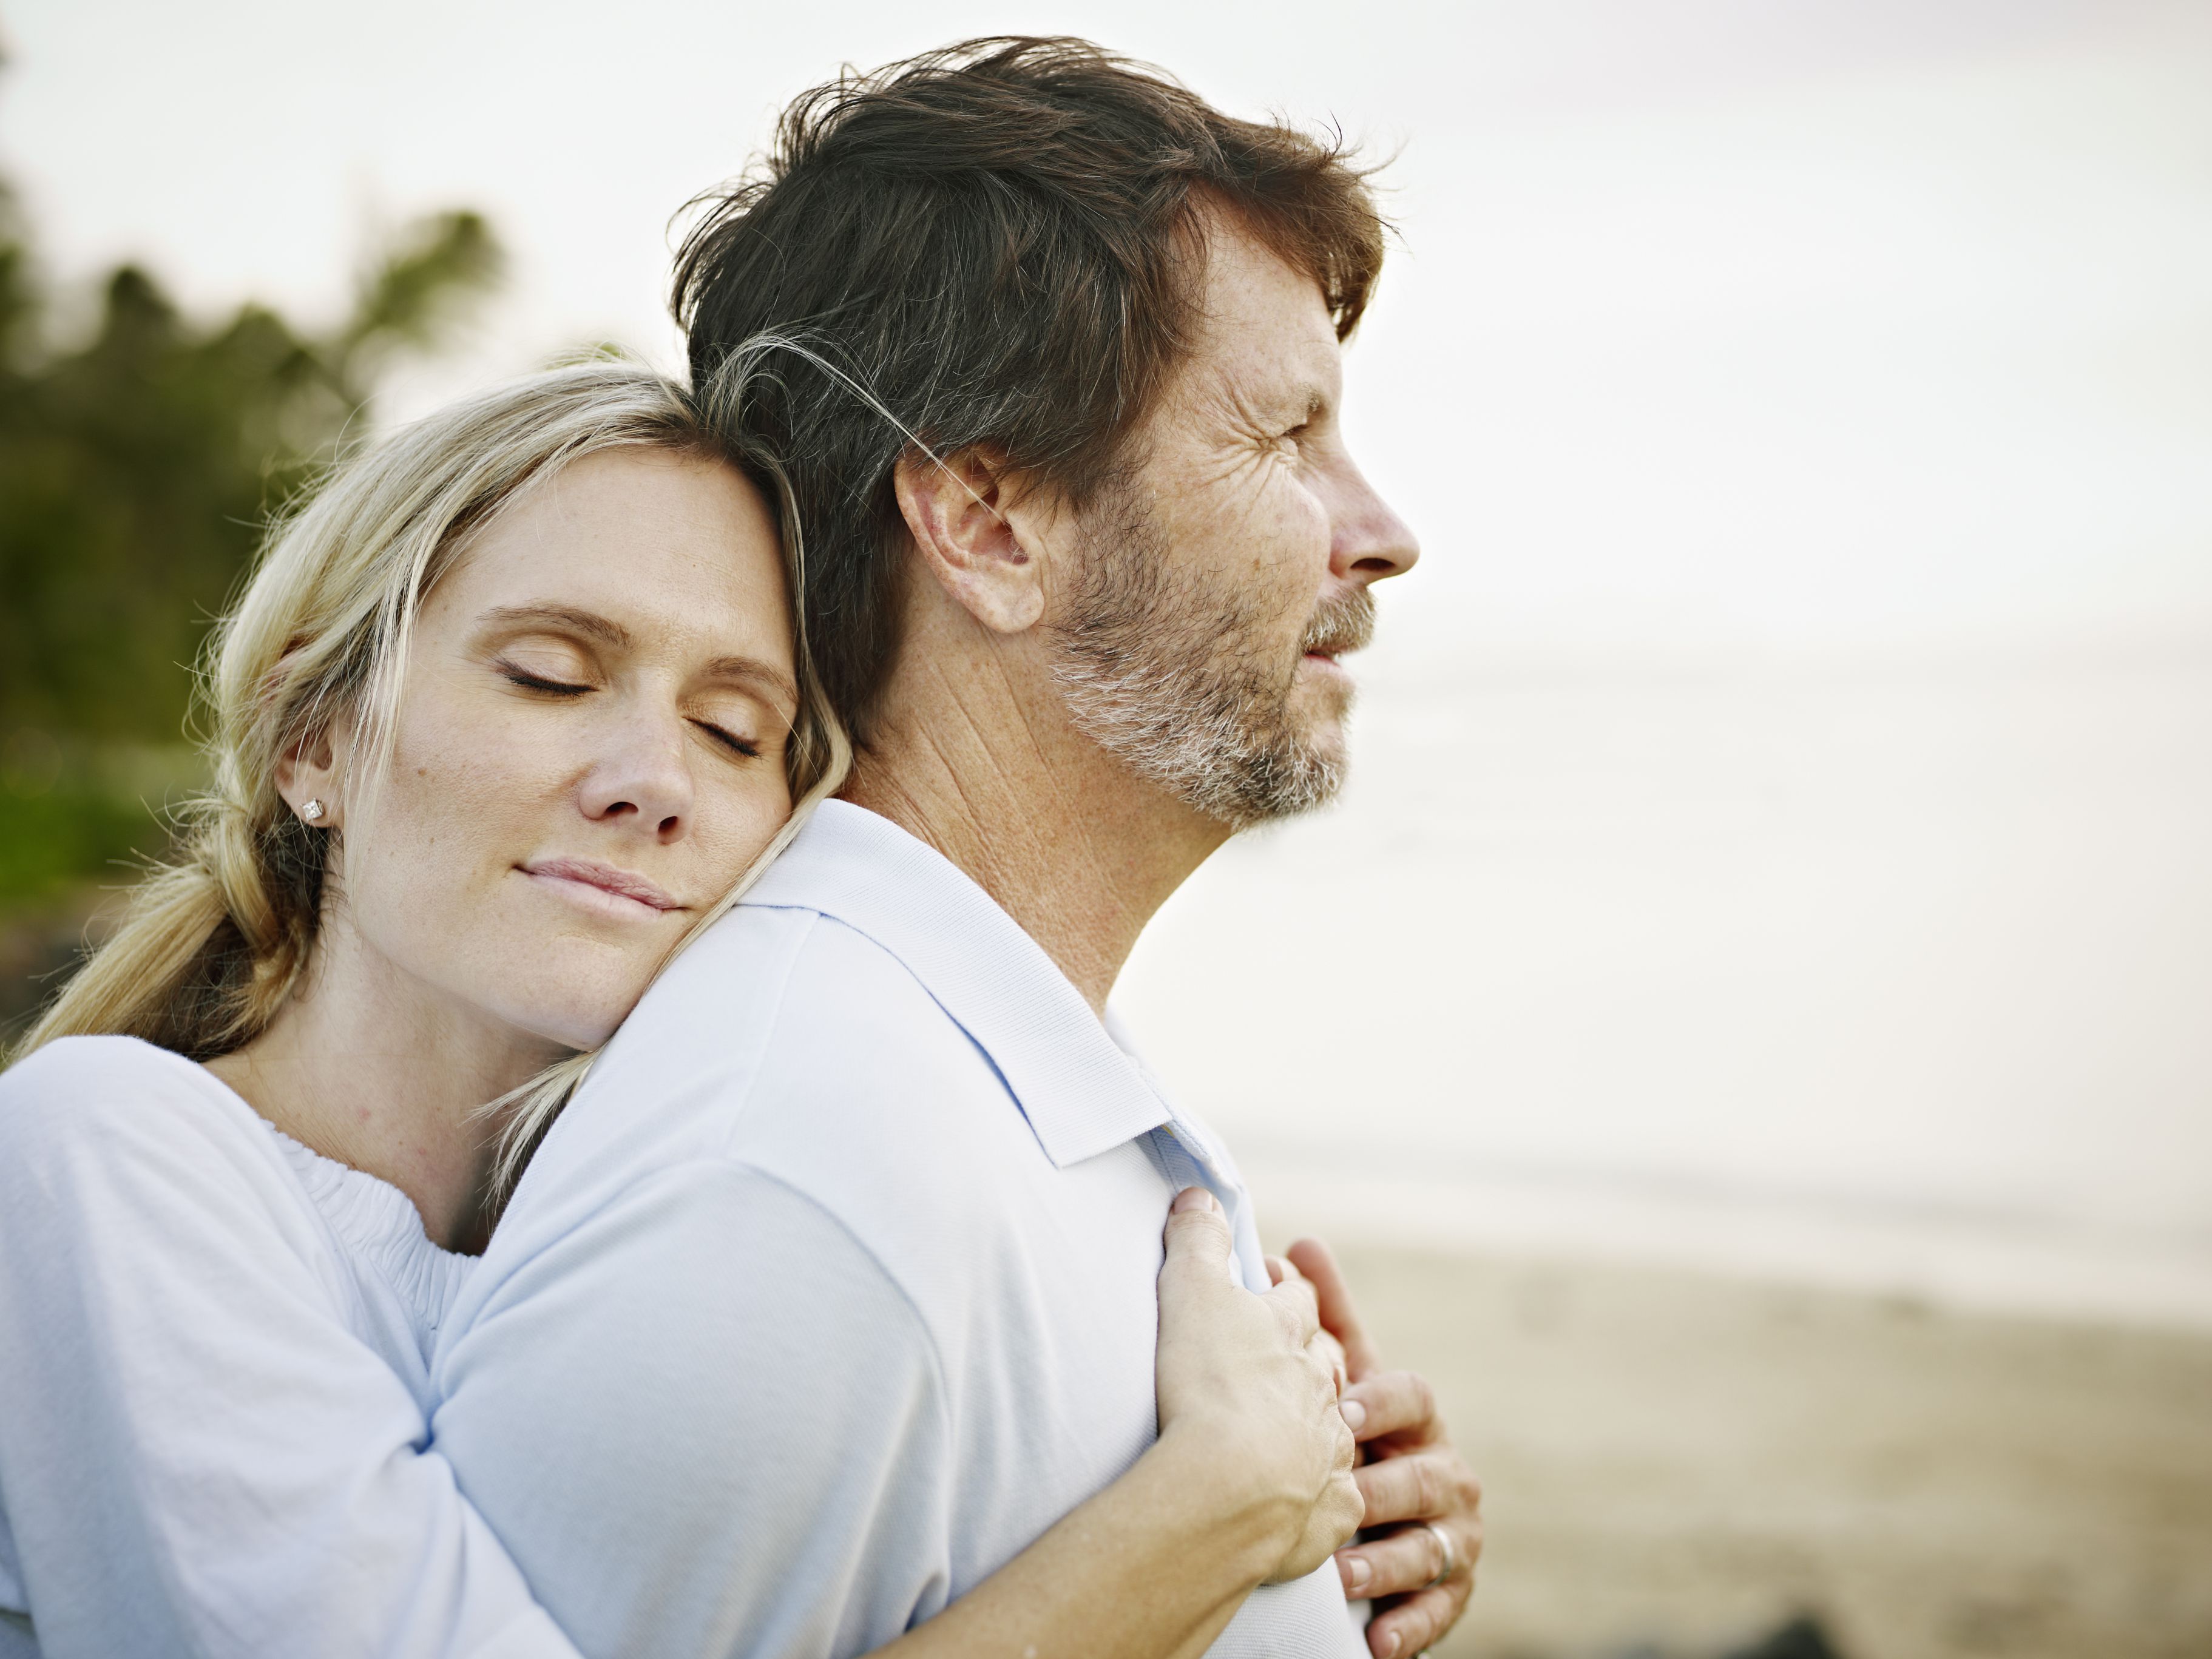 5 Ways to Support Your Husband Through a Tough Time